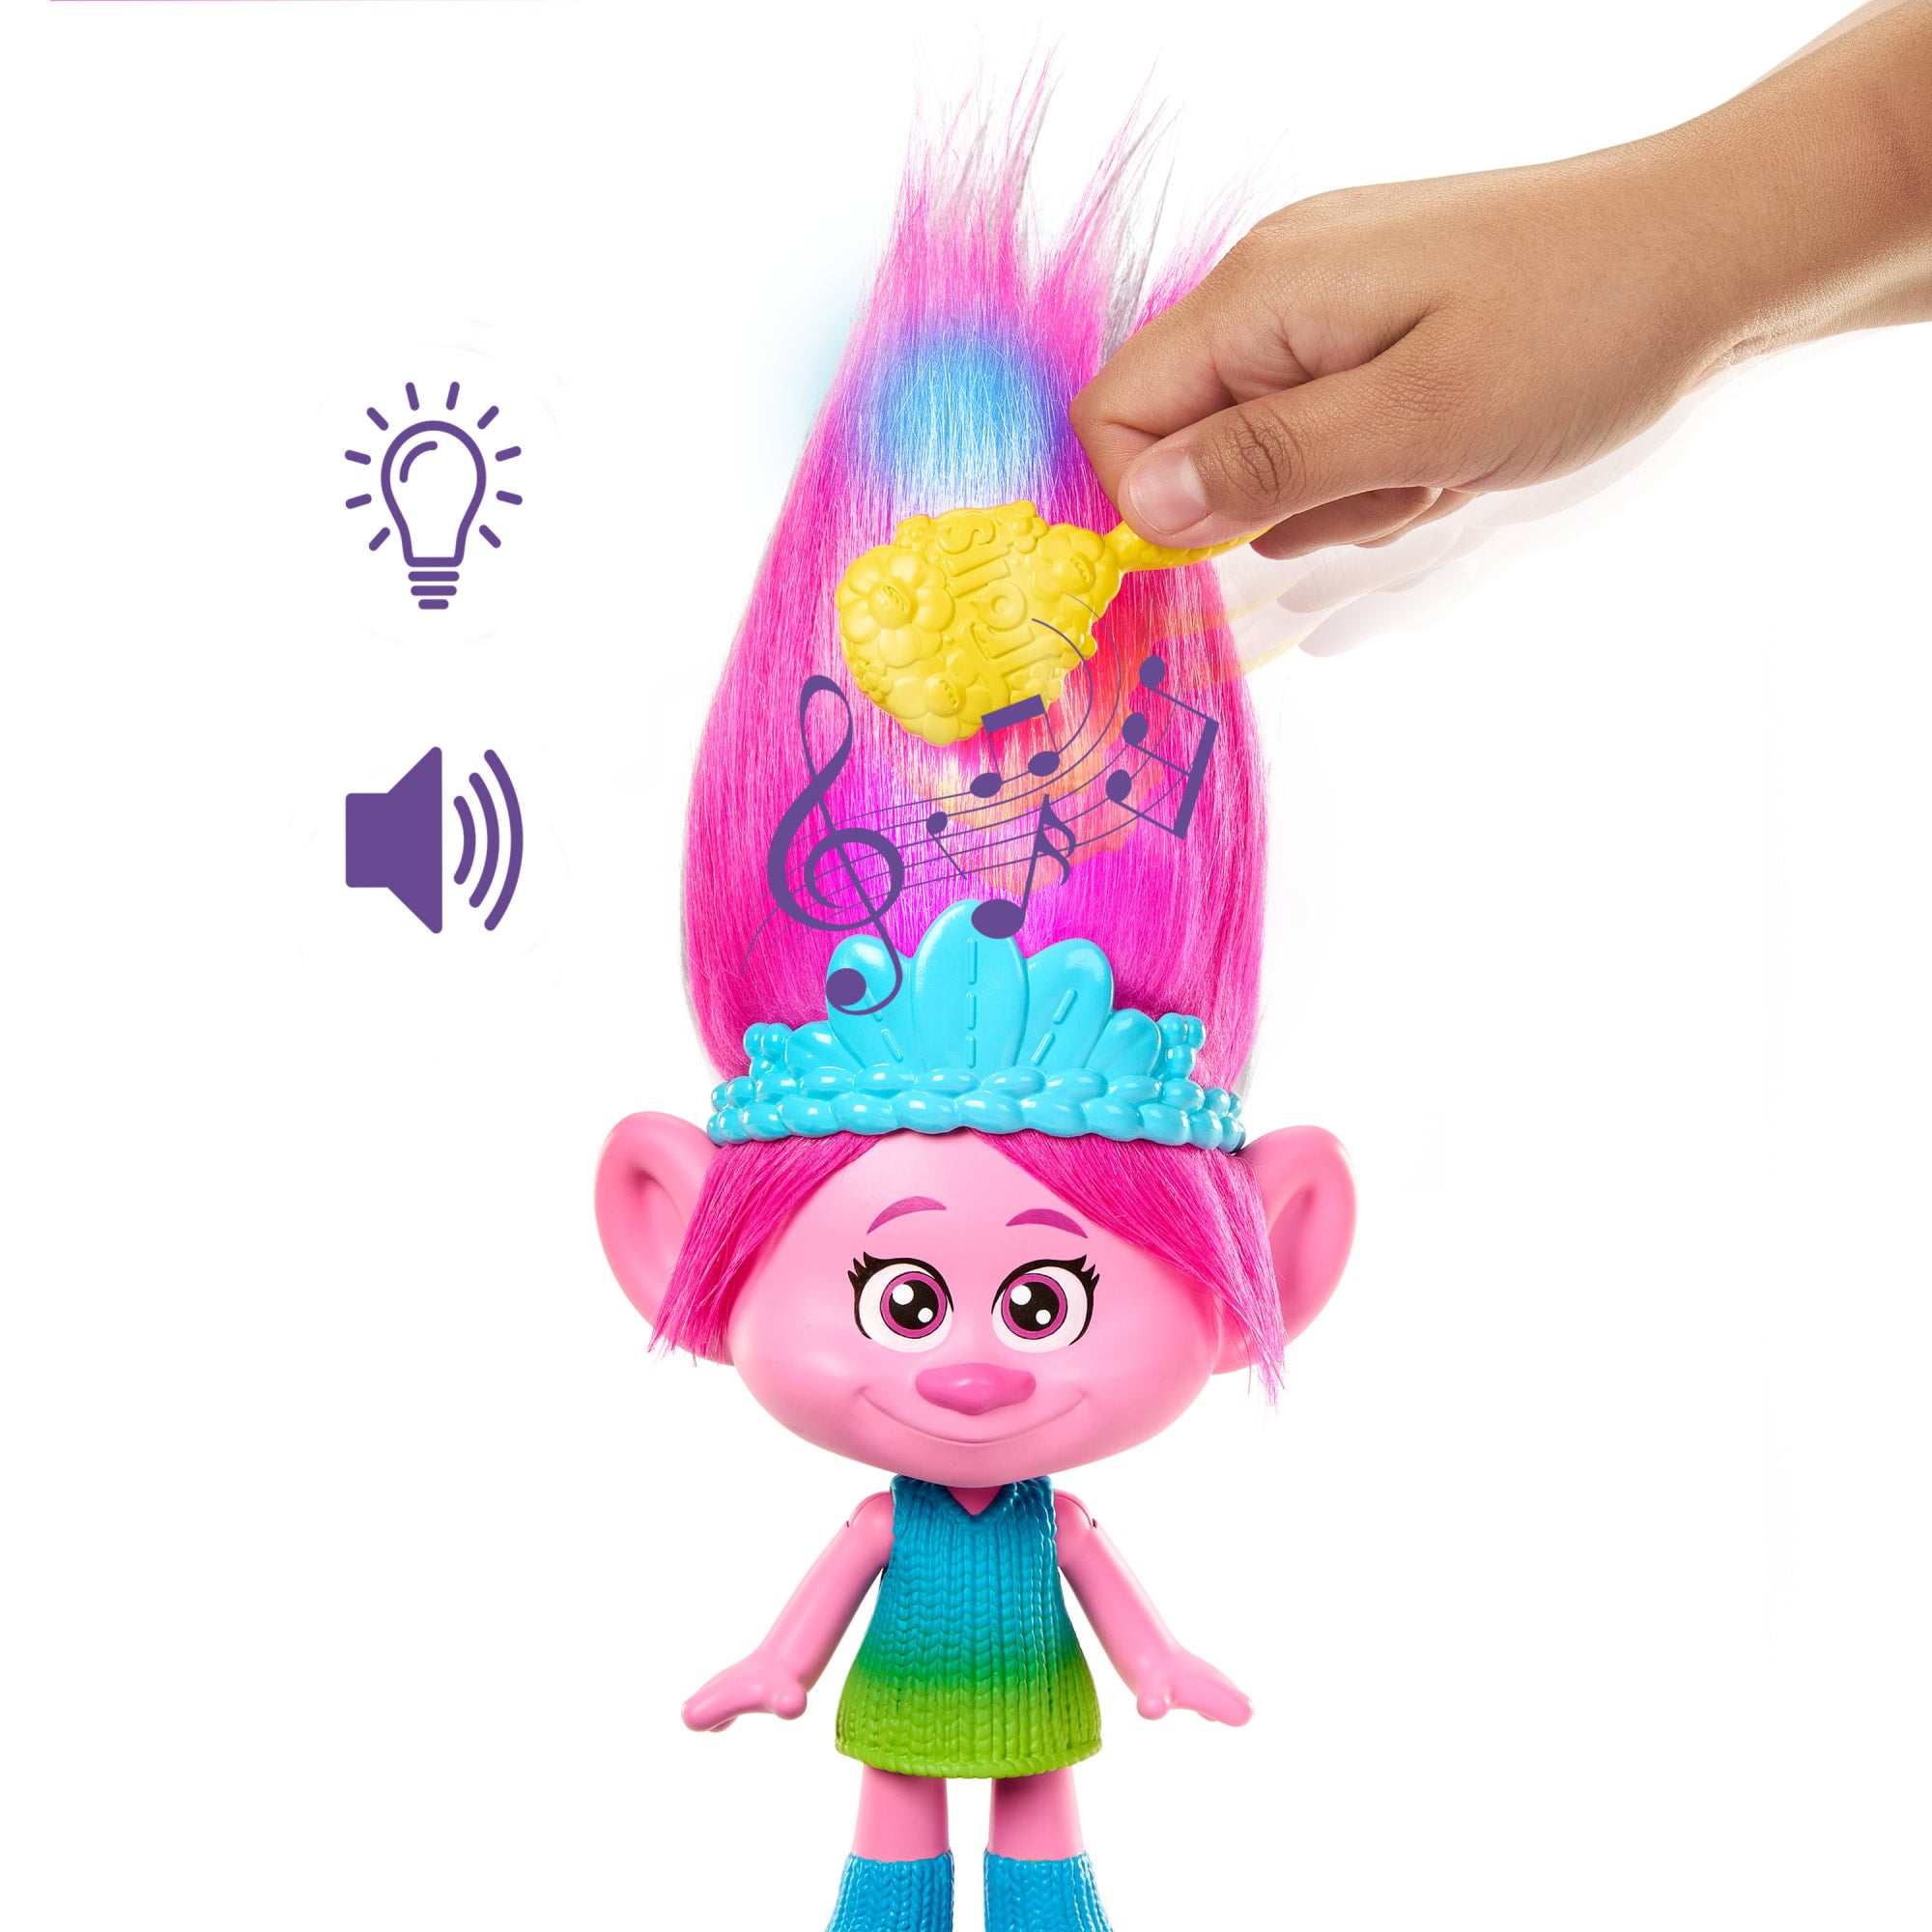 Play-Doh Trolls World Tour Rainbow Hair Poppy Styling Toy for Kids